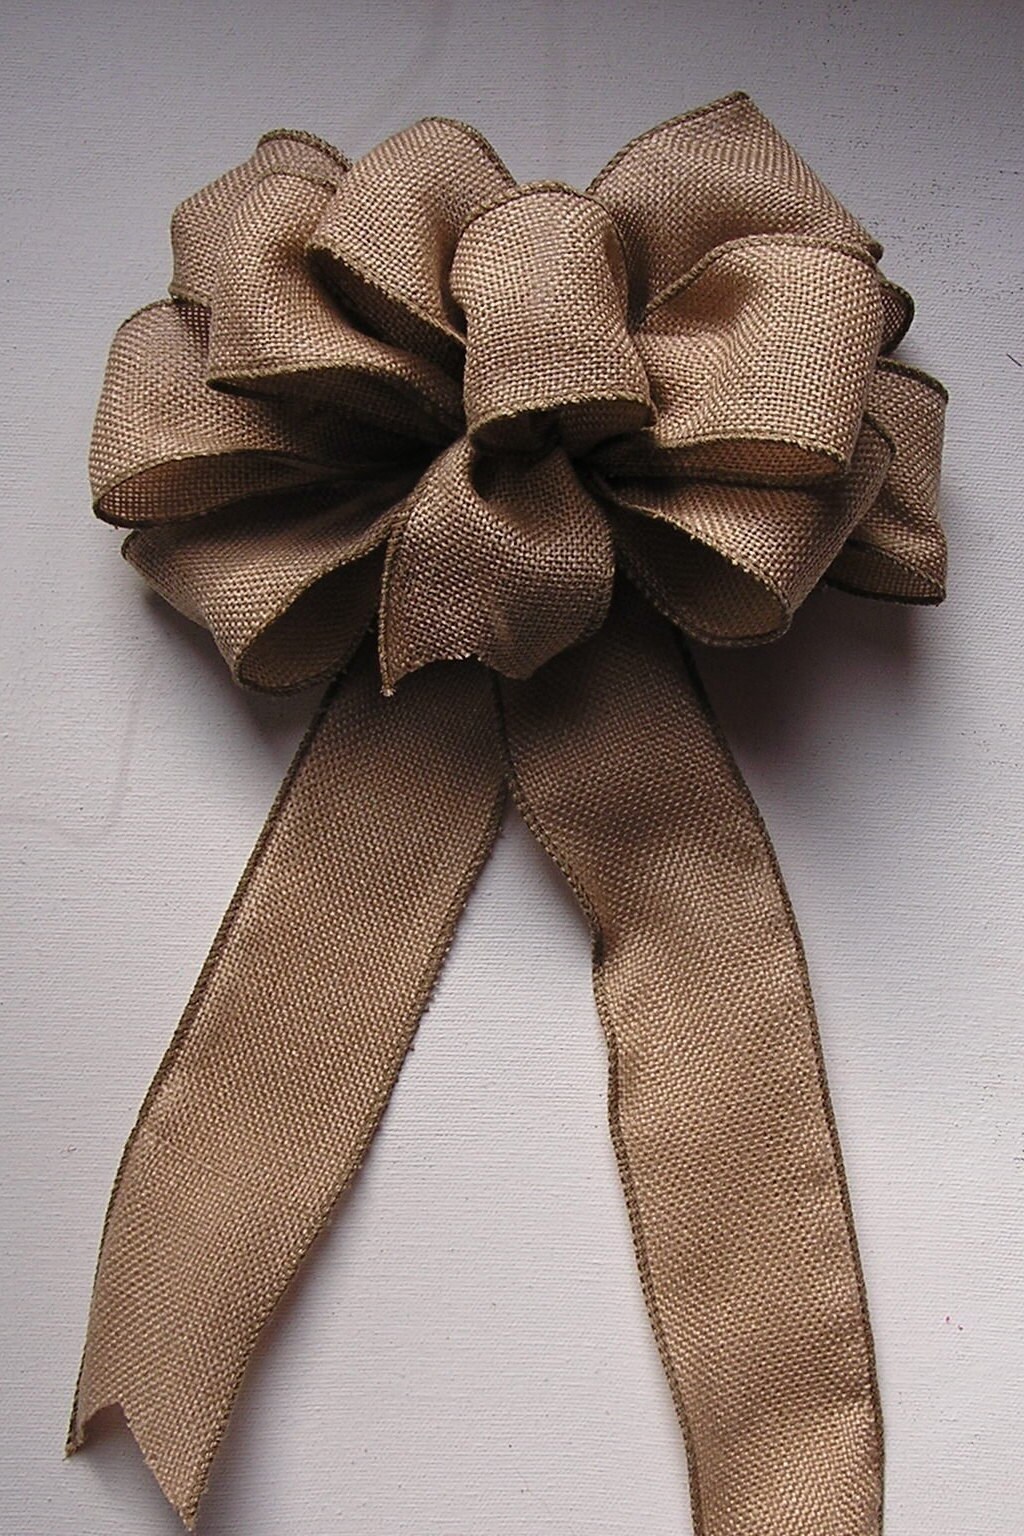 Natural Burlap Bow, Wired Burlap Bow, 2 Sizes